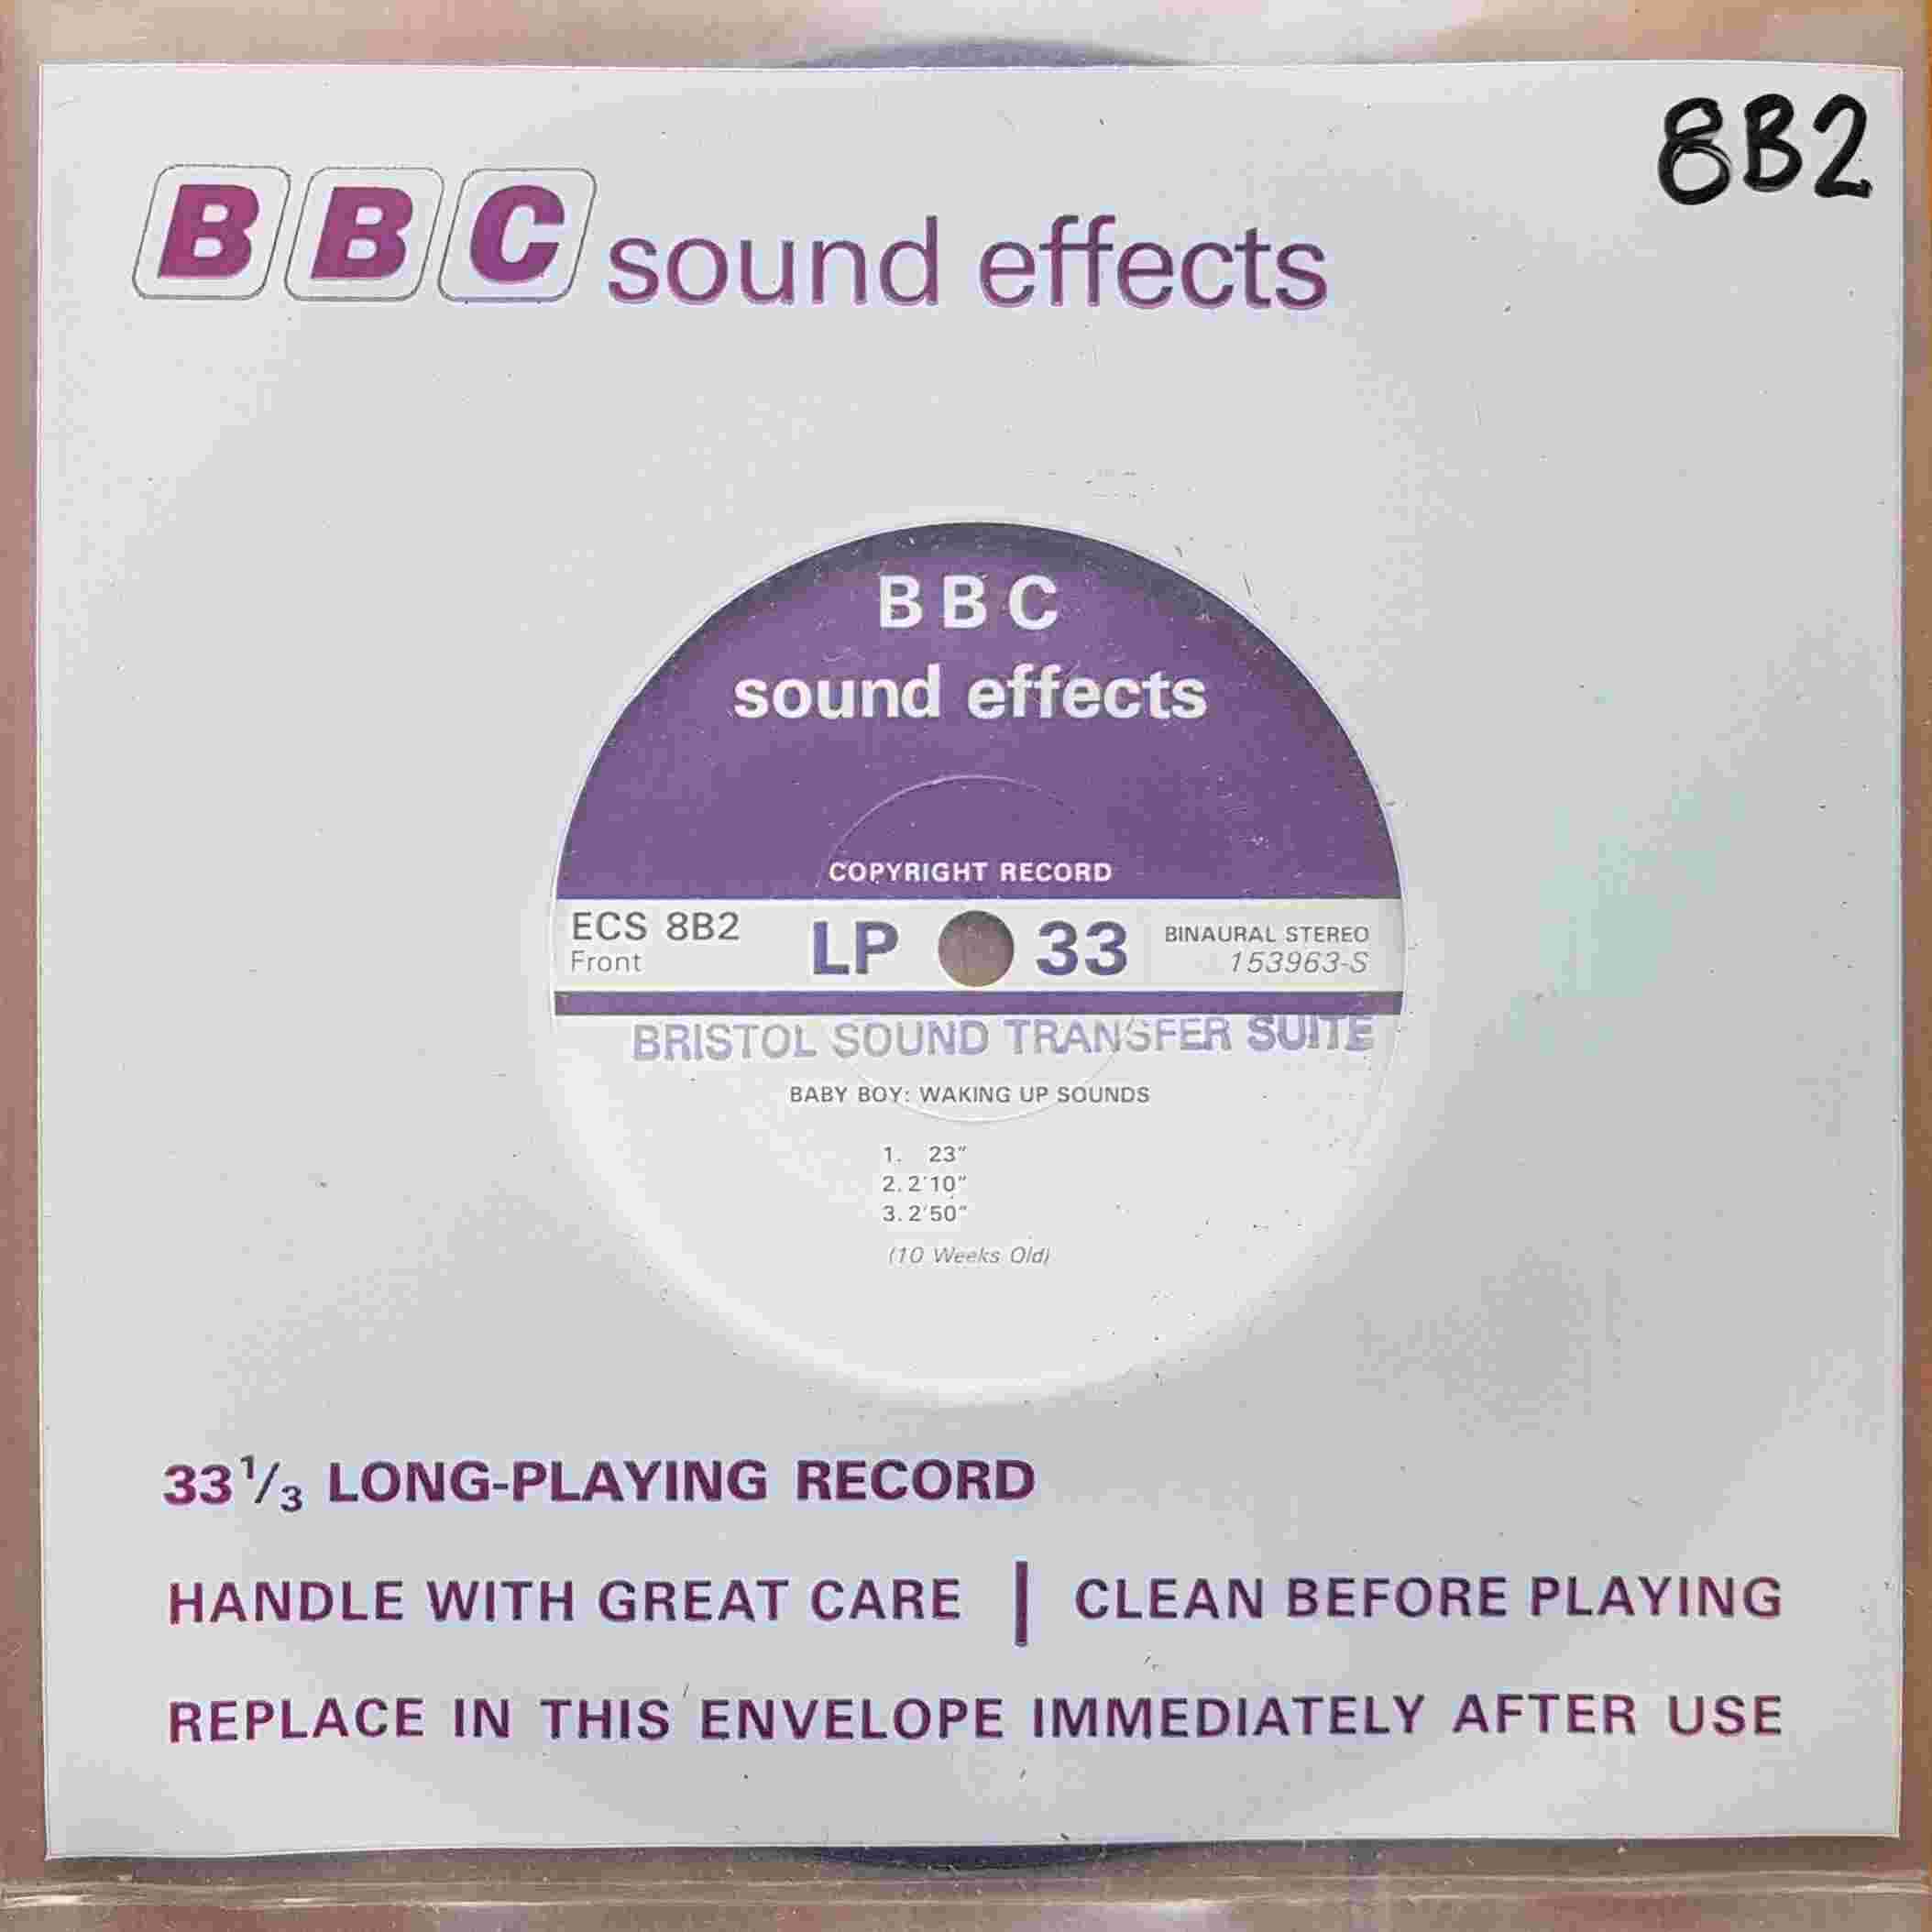 Picture of ECS 8B2 Baby boy: Waking up sounds by artist Not registered from the BBC records and Tapes library